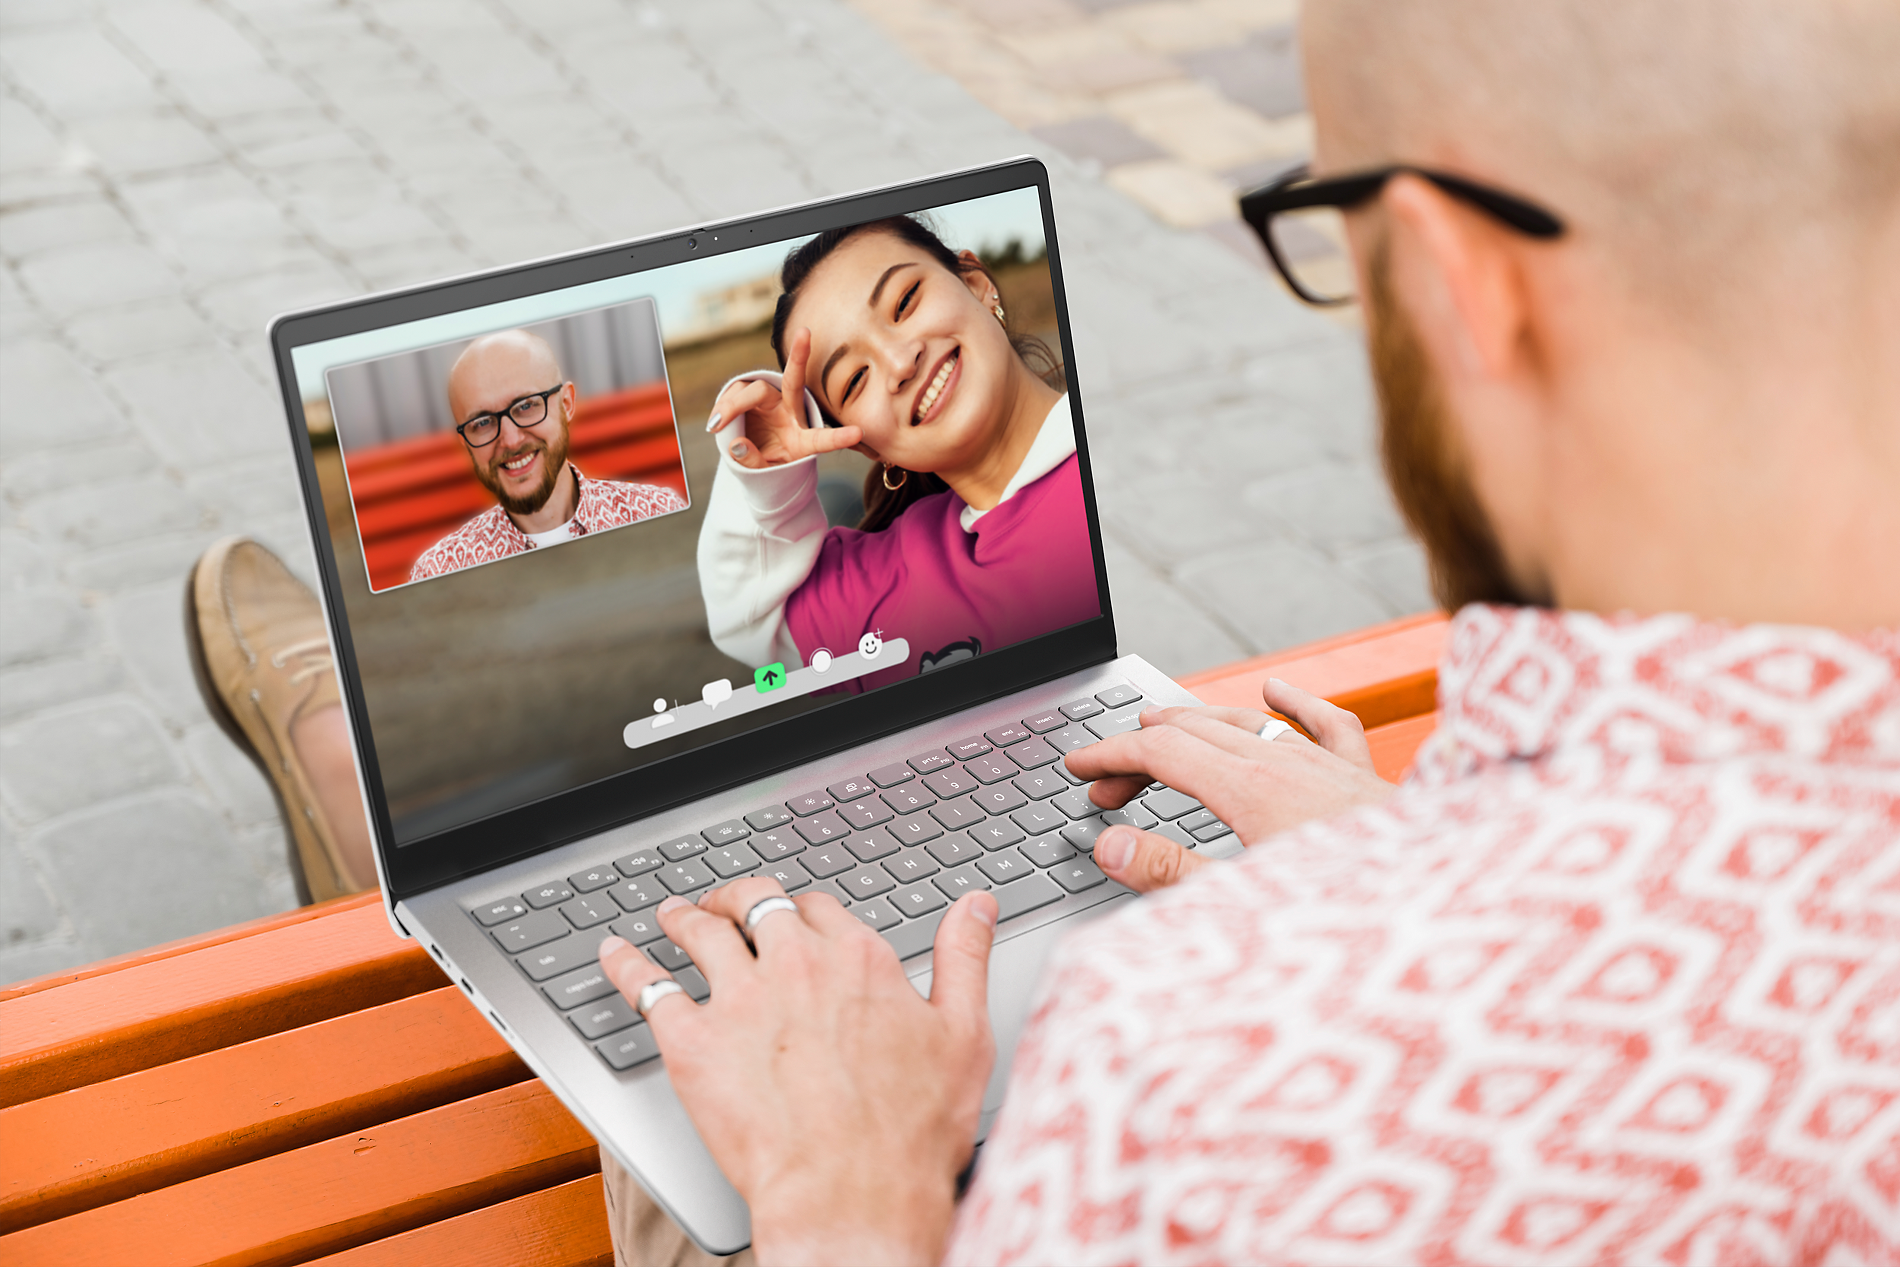 A man using laptop to make a video call with a woman, who is visible on the screen